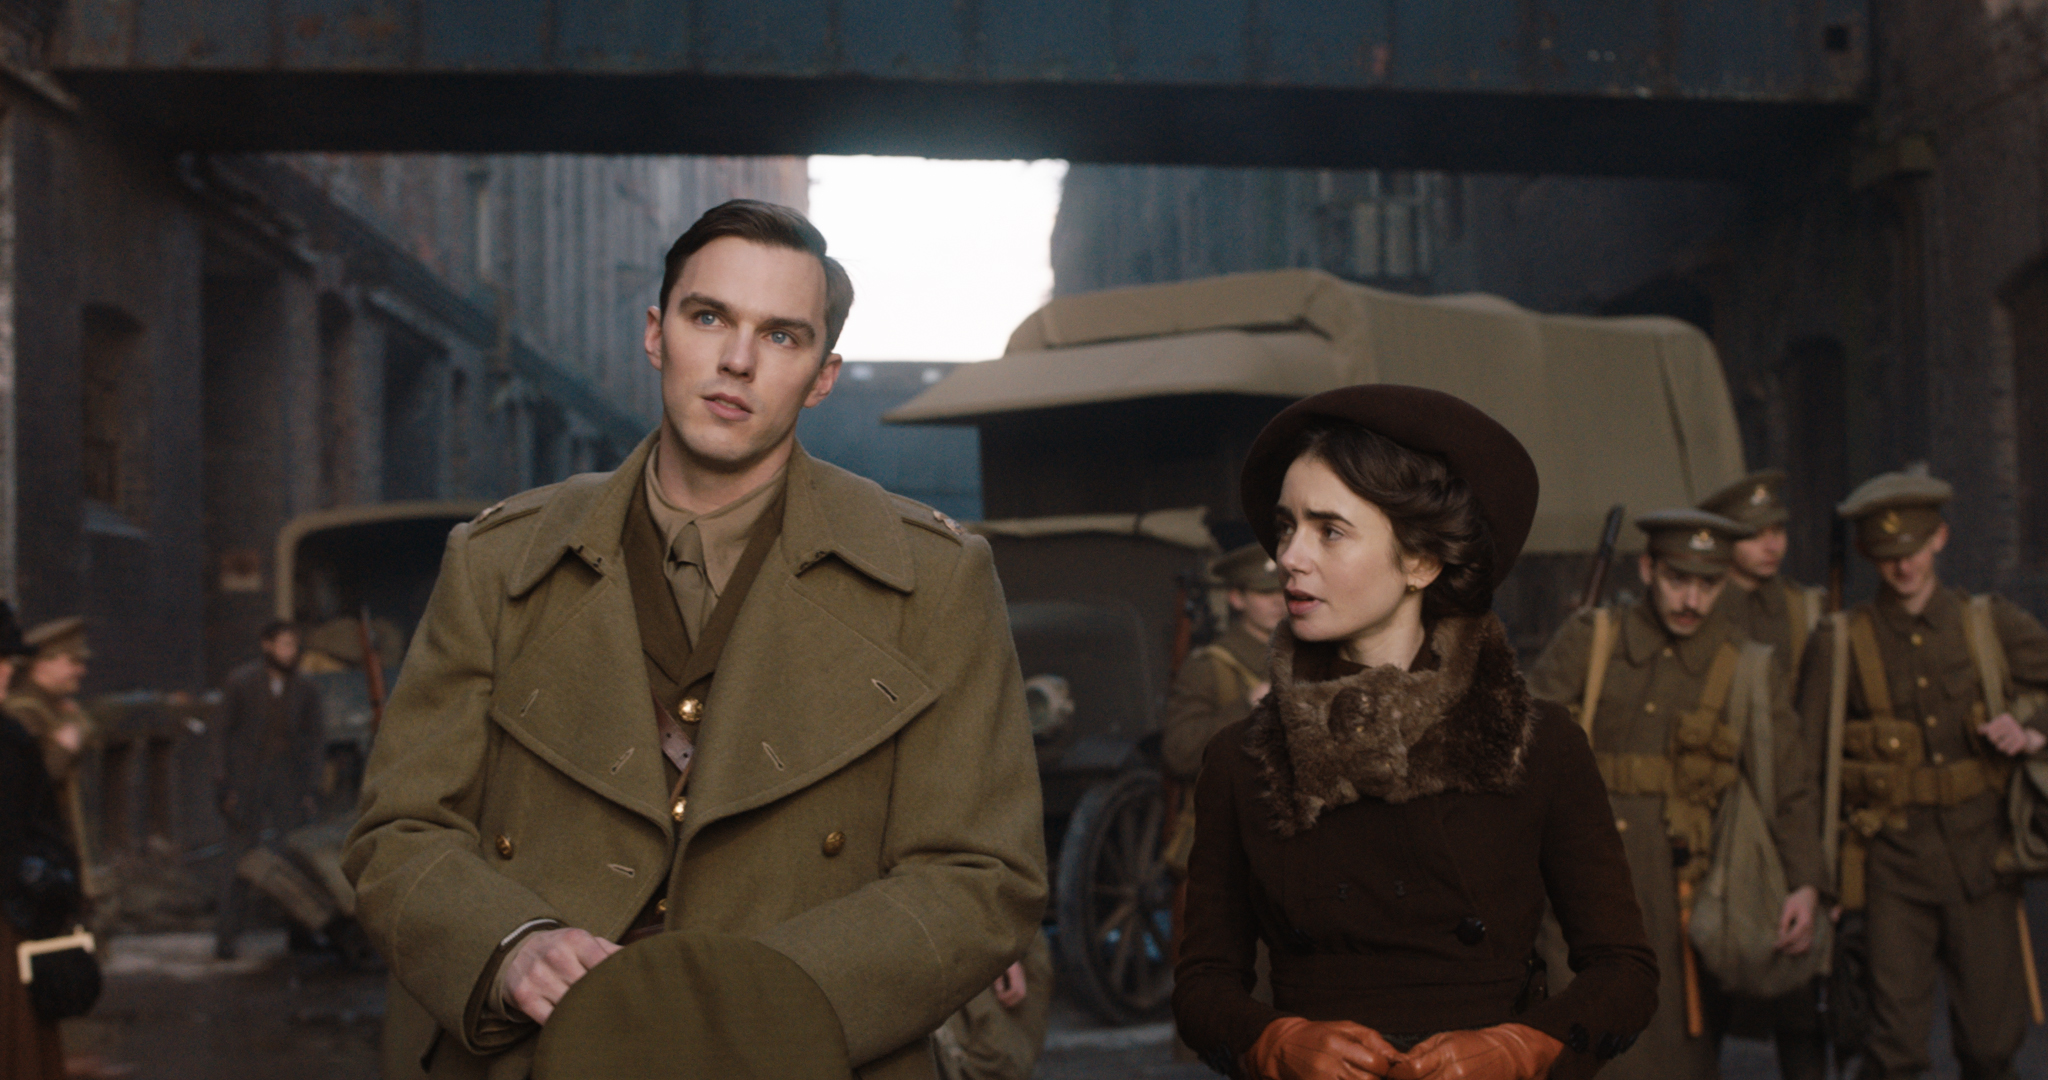 Nicholas Hoult and Lily Collins in the film 'Tolkien.' © 2019 Twentieth Century Fox Film Corporation All Rights Reserved (Twentieth Century Fox Film Corporation)